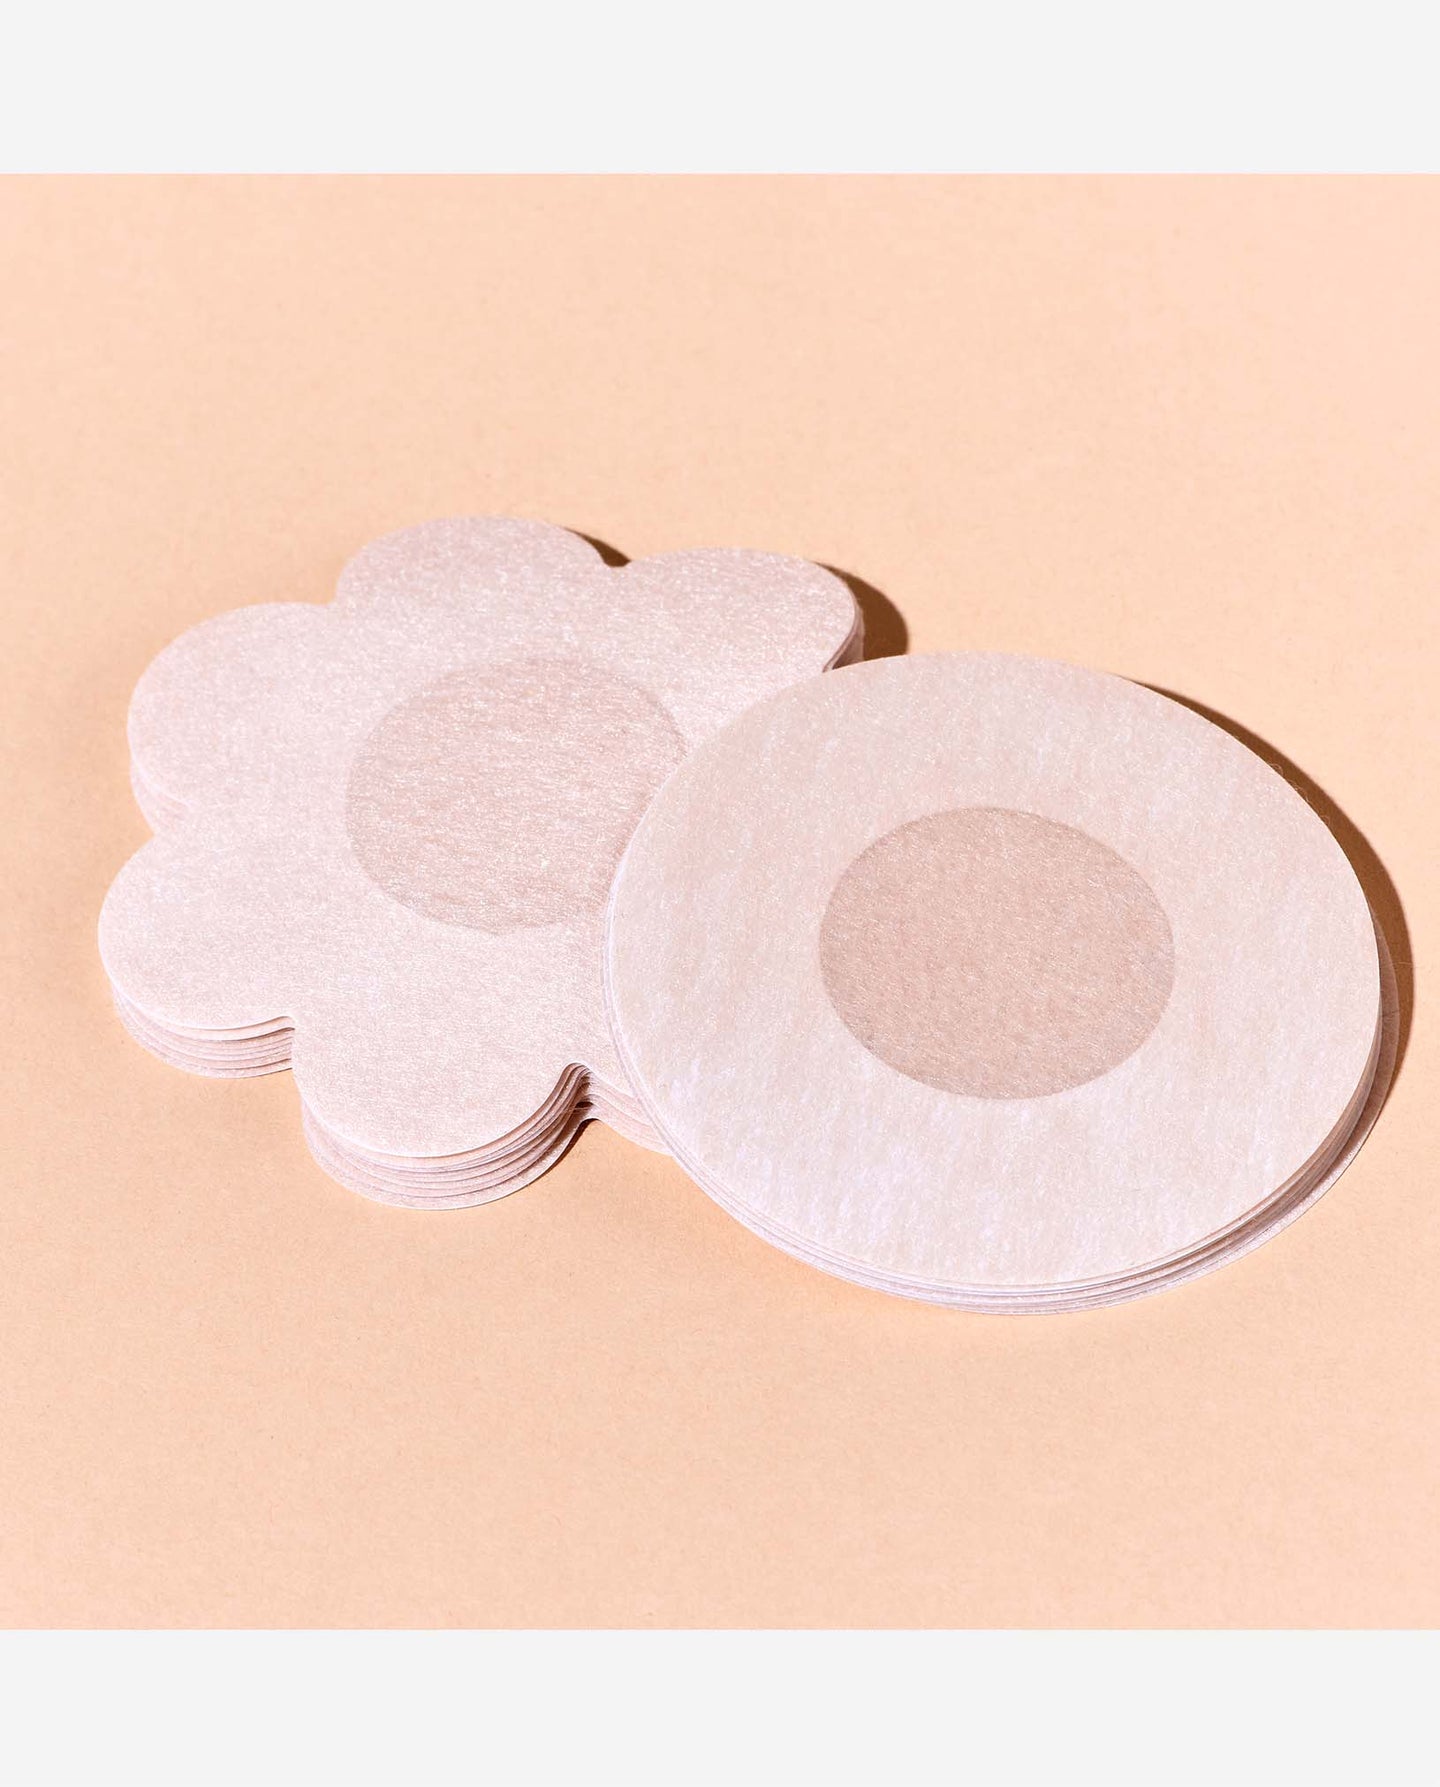 Disposable Nipple Covers